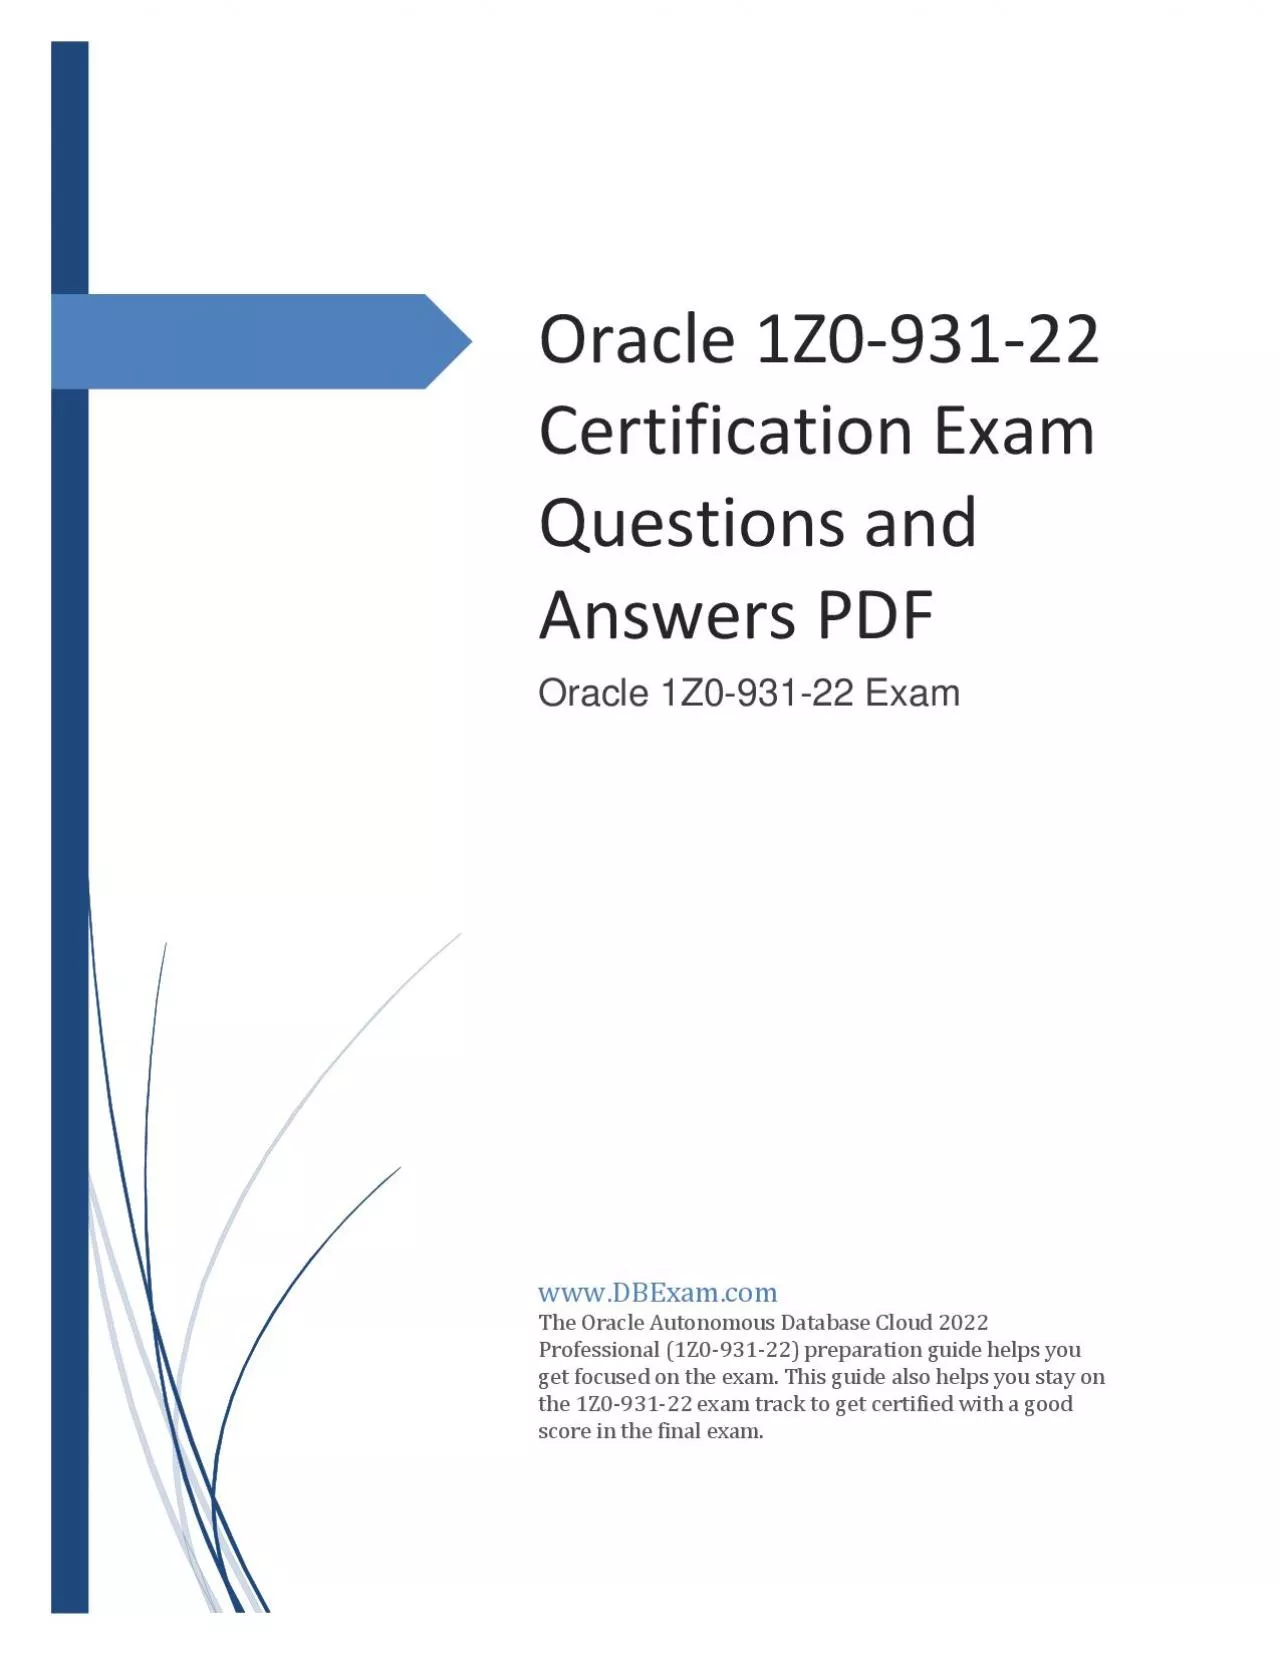 Oracle 1Z0-931-22 Certification Exam Questions and Answers PDF [2023]